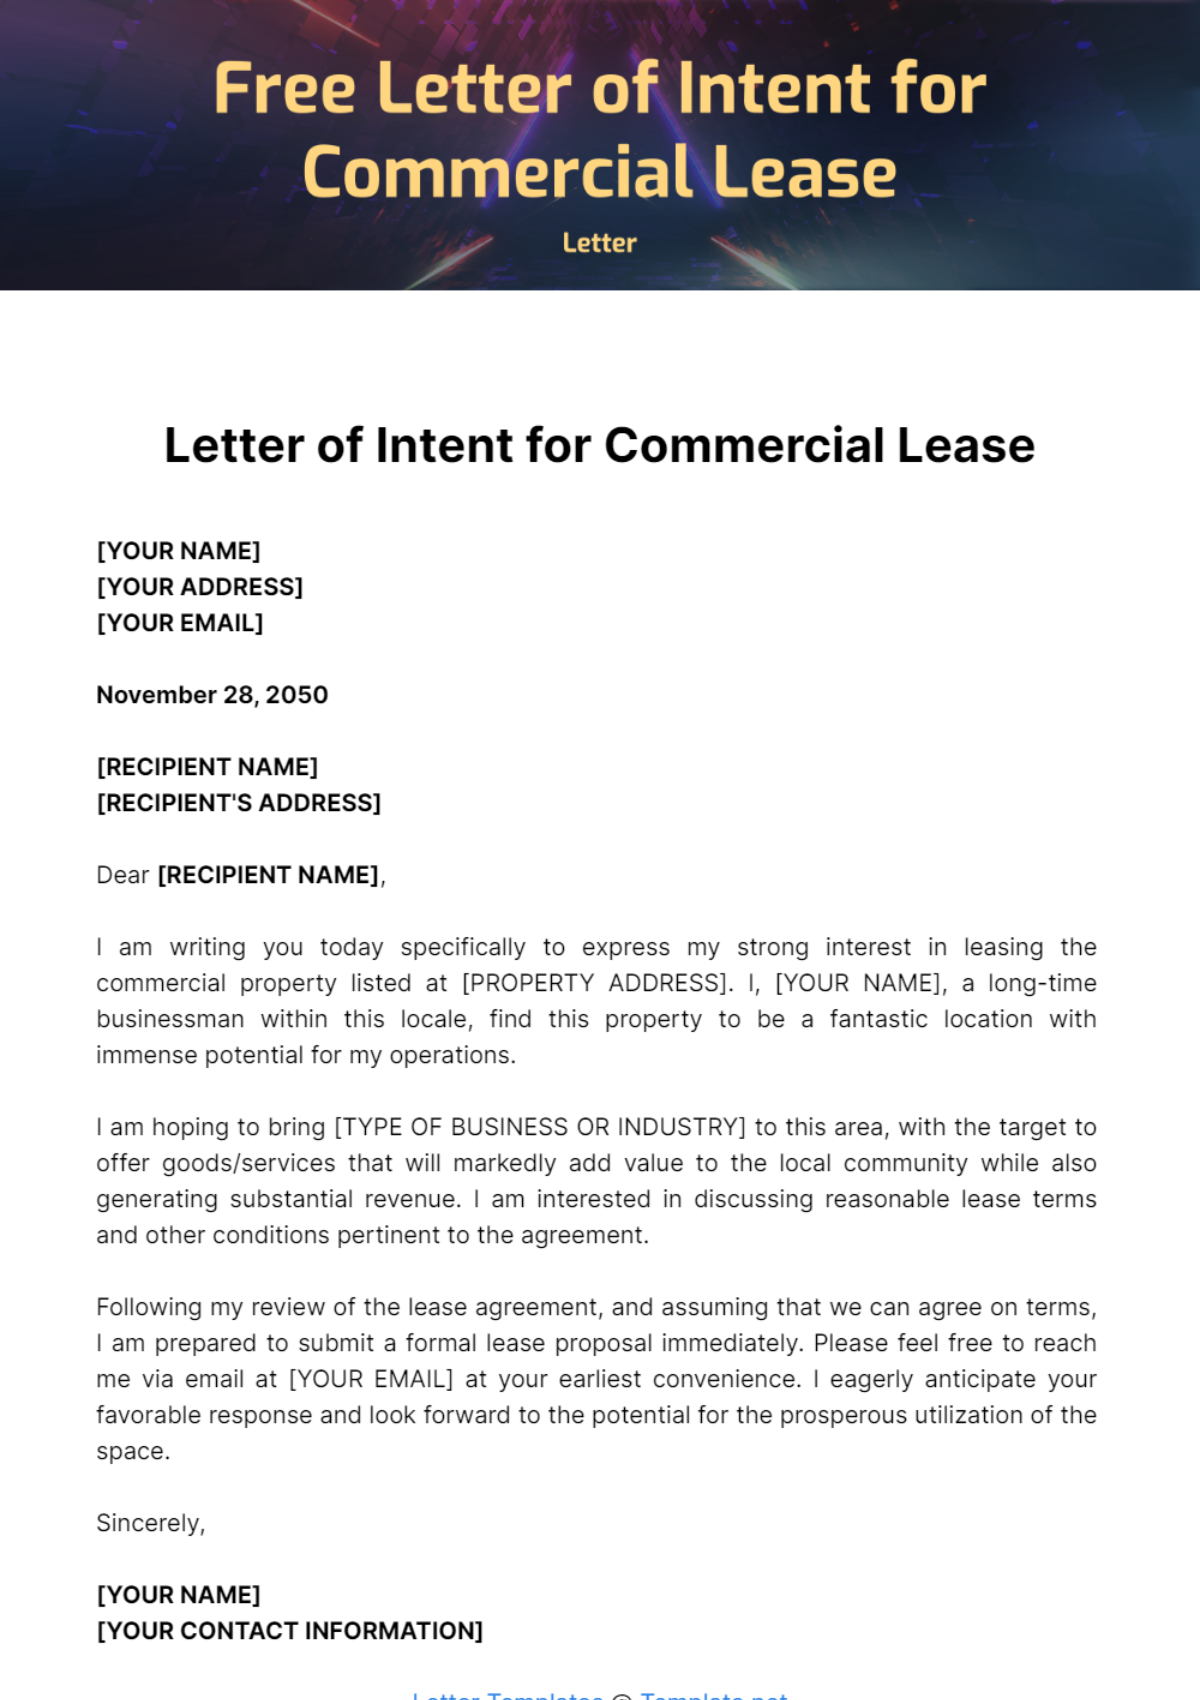 Free Letter of Intent for Commercial Lease Template